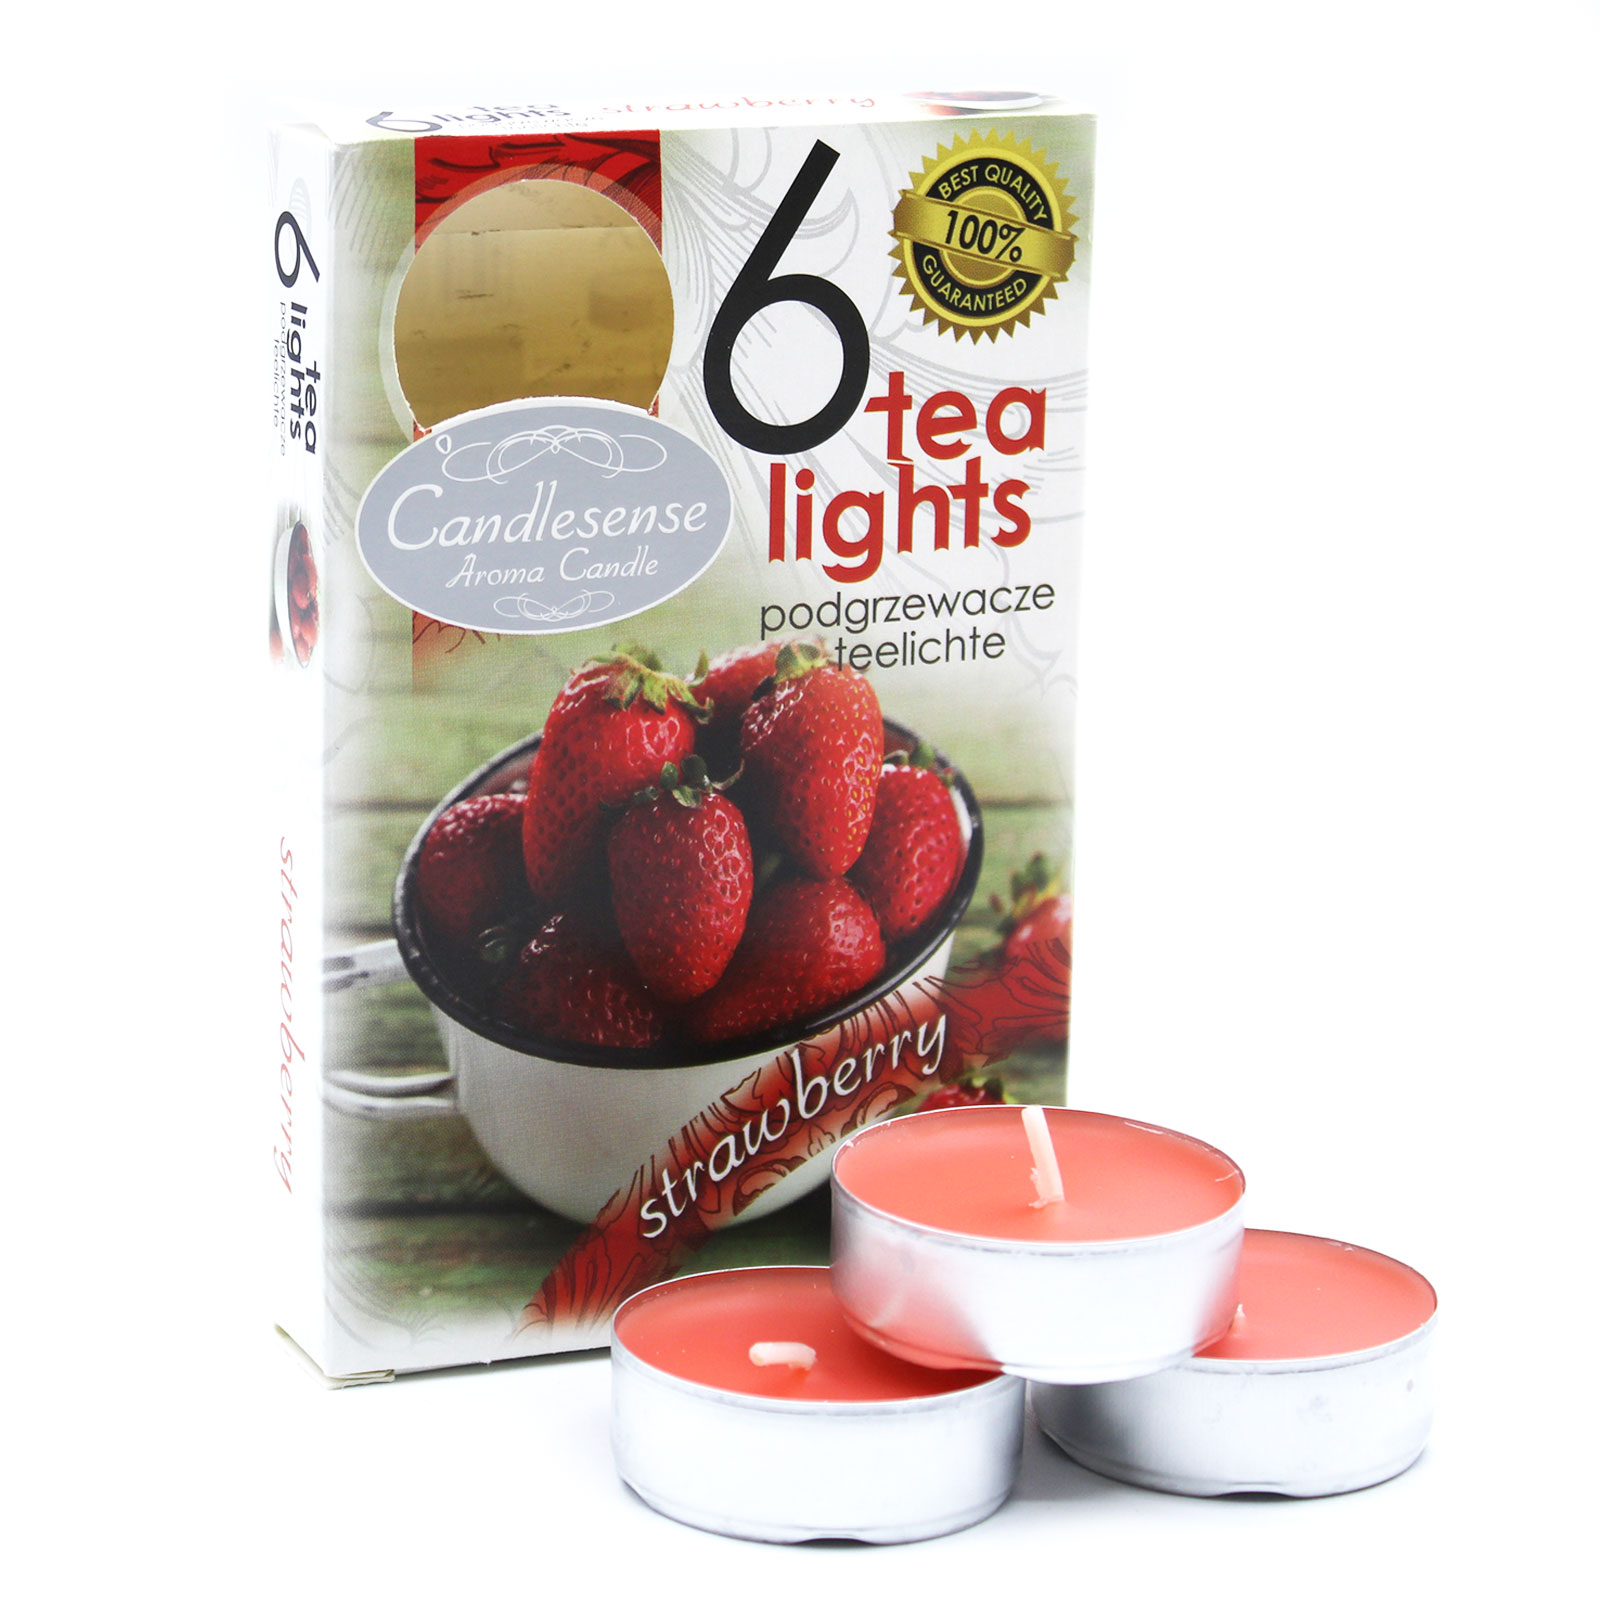 3 x Packs 6 Scented Tealights - Strawberry